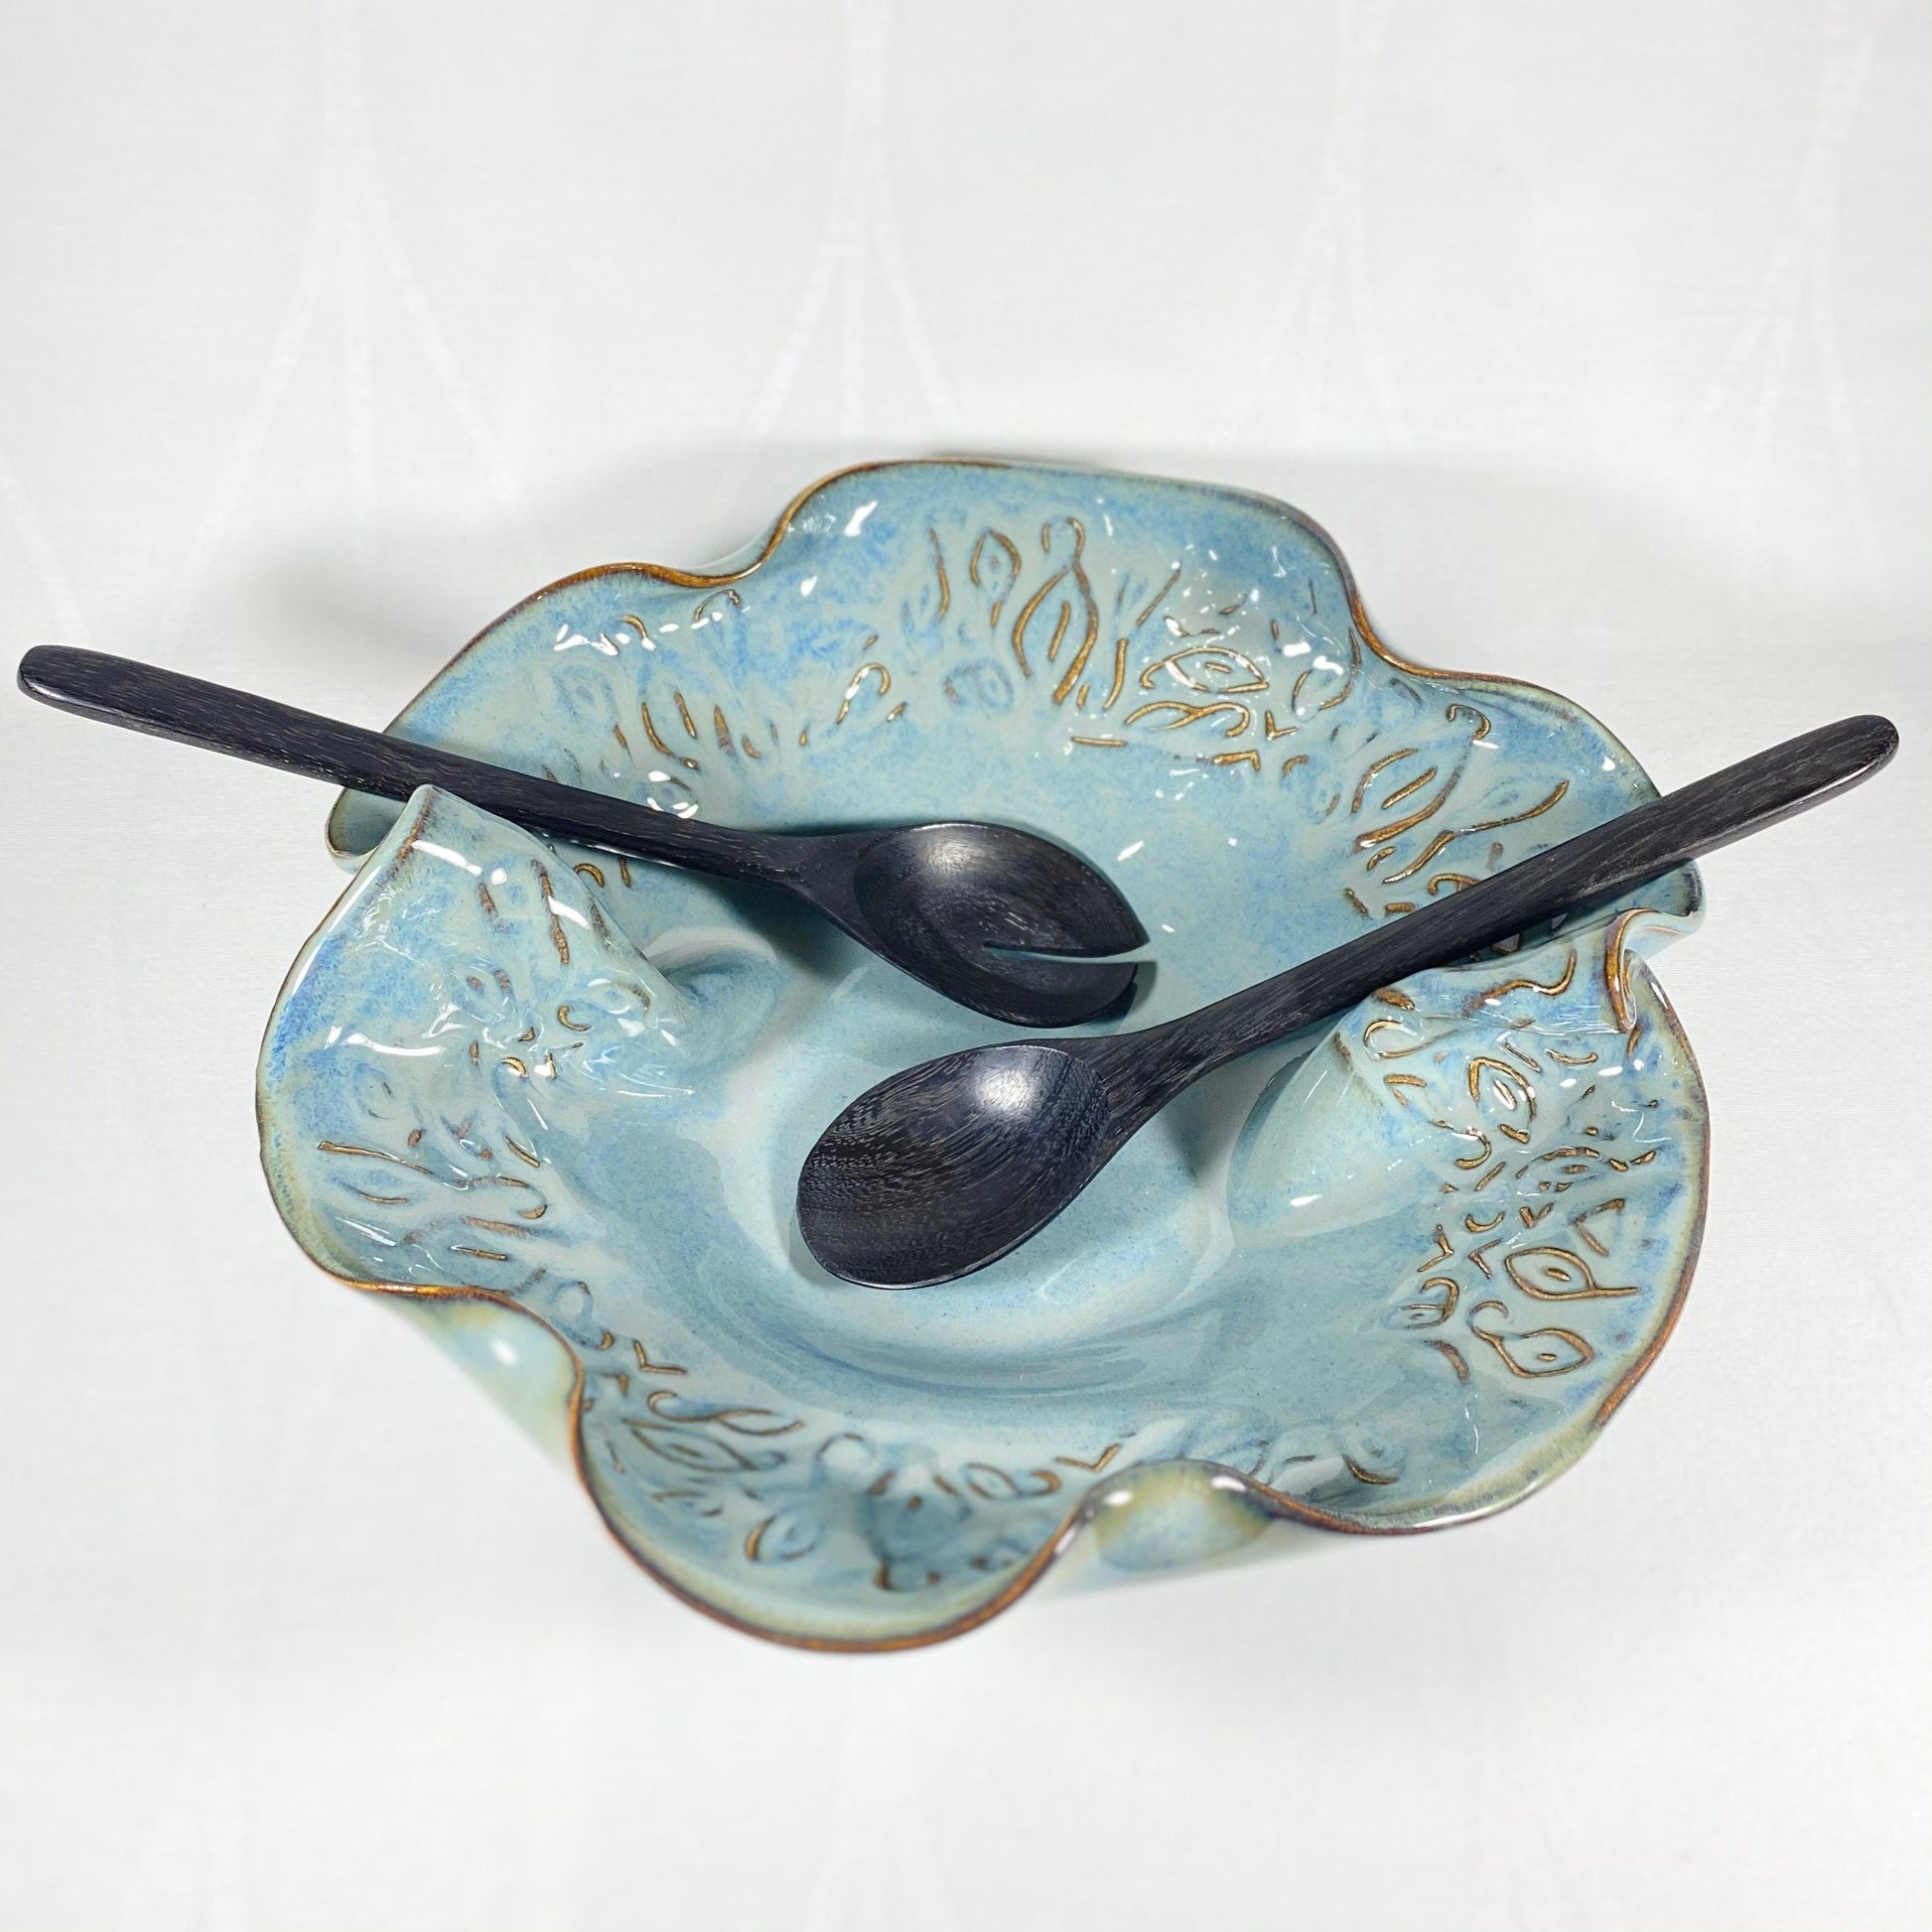 Handmade Light Blue Bowl with Serving Spoons, Functional and Decorative Pottery